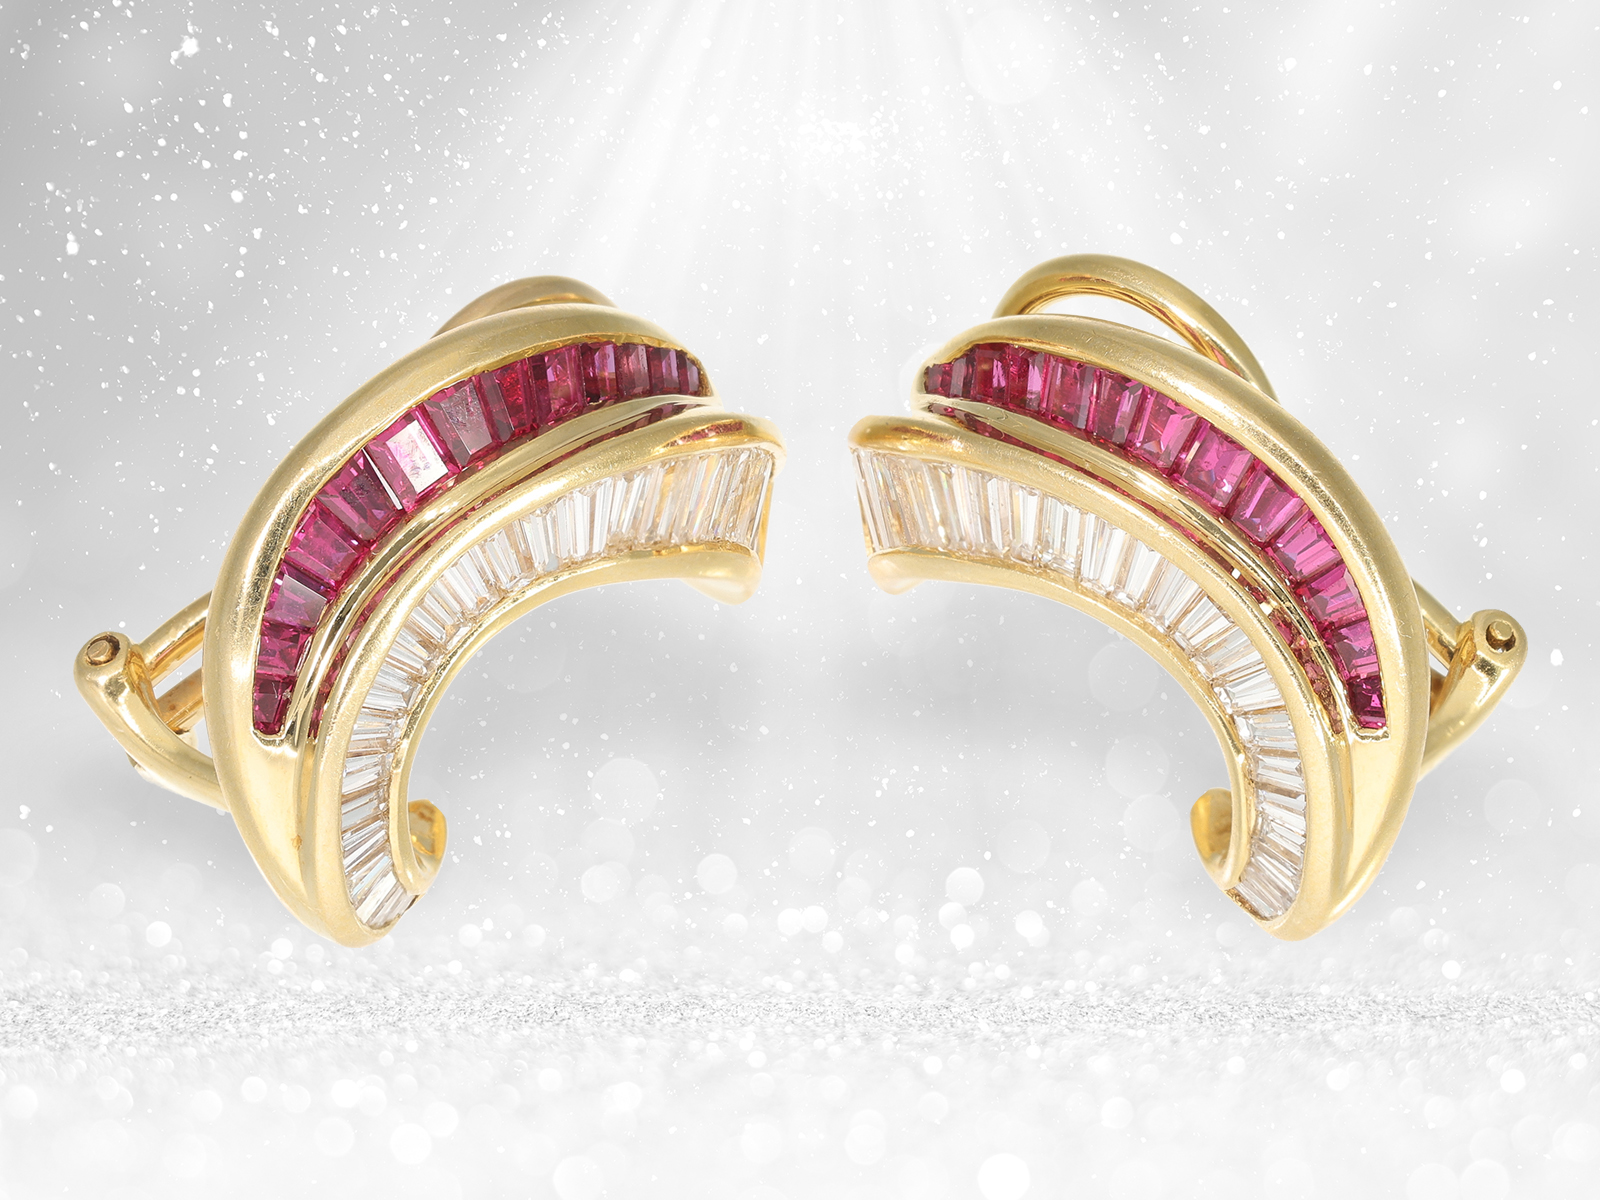 Earrings: highly refined goldsmith earrings with rubies and diamonds - Image 4 of 4